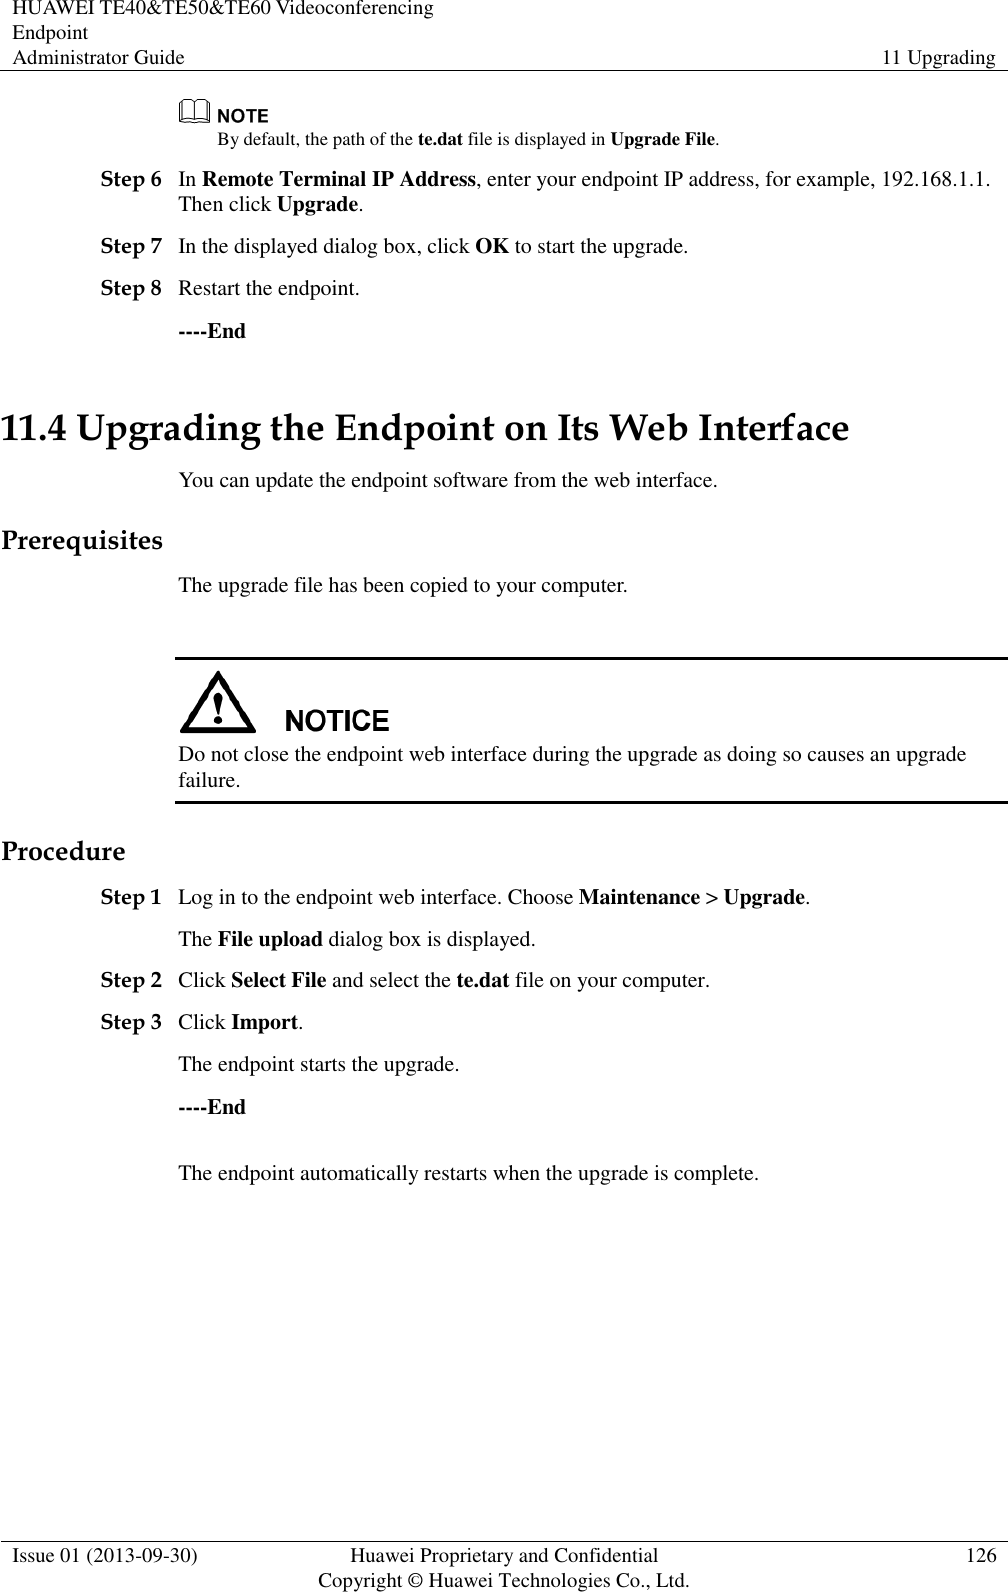 HUAWEI TE40&amp;TE50&amp;TE60 Videoconferencing Endpoint Administrator Guide 11 Upgrading  Issue 01 (2013-09-30) Huawei Proprietary and Confidential                                     Copyright © Huawei Technologies Co., Ltd. 126   By default, the path of the te.dat file is displayed in Upgrade File. Step 6 In Remote Terminal IP Address, enter your endpoint IP address, for example, 192.168.1.1. Then click Upgrade. Step 7 In the displayed dialog box, click OK to start the upgrade. Step 8 Restart the endpoint. ----End 11.4 Upgrading the Endpoint on Its Web Interface You can update the endpoint software from the web interface. Prerequisites The upgrade file has been copied to your computer.   Do not close the endpoint web interface during the upgrade as doing so causes an upgrade failure. Procedure Step 1 Log in to the endpoint web interface. Choose Maintenance &gt; Upgrade. The File upload dialog box is displayed. Step 2 Click Select File and select the te.dat file on your computer. Step 3 Click Import. The endpoint starts the upgrade. ----End The endpoint automatically restarts when the upgrade is complete.   